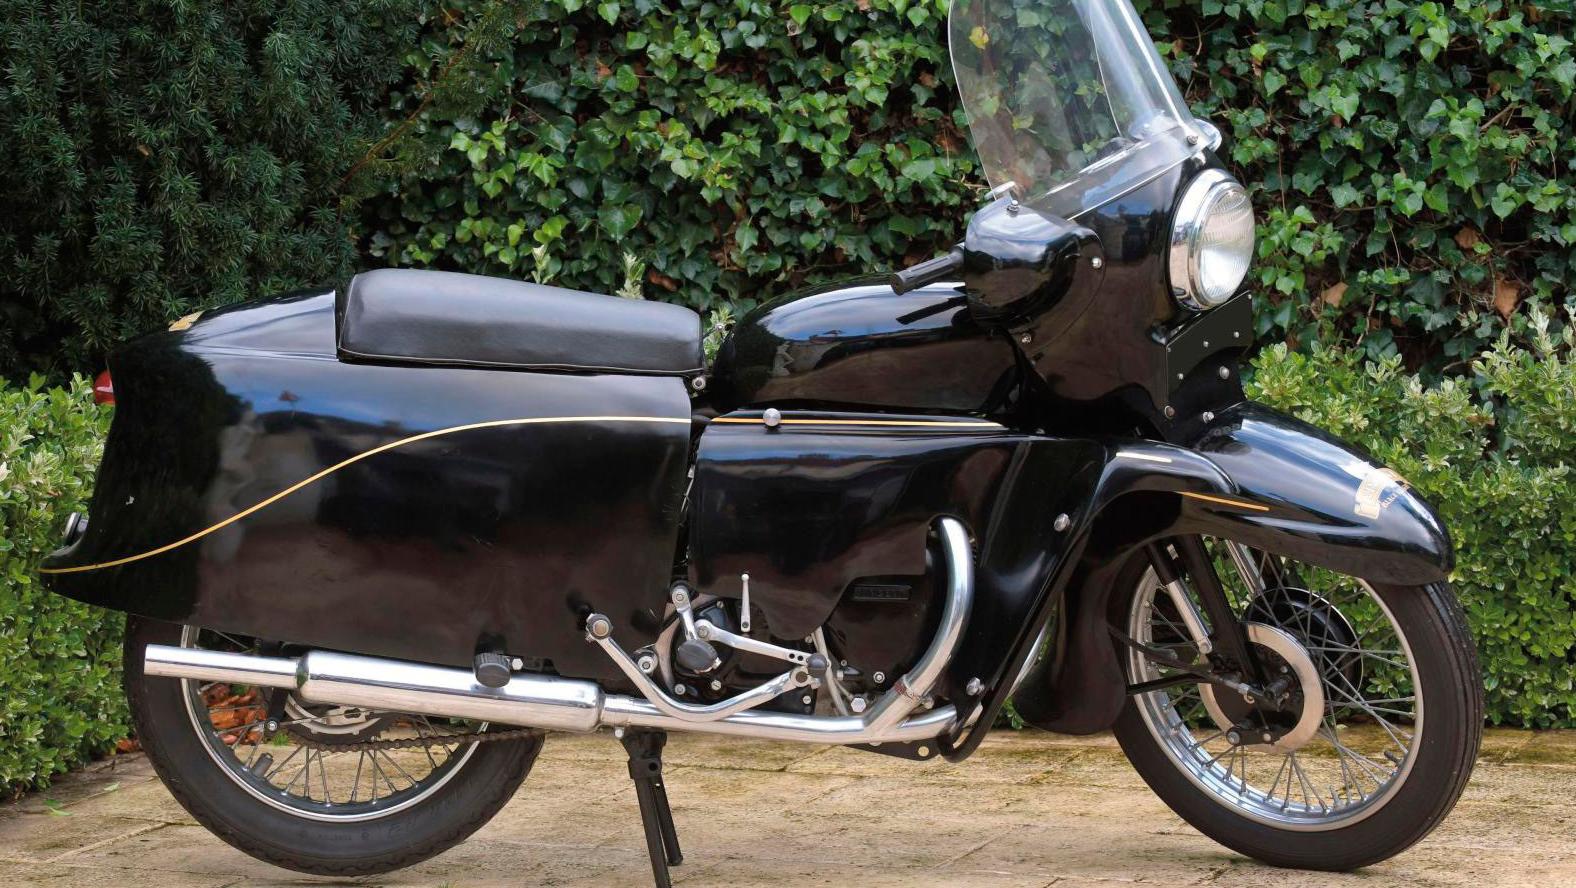 1955 Vincent 1000 Black Knight series D, with a 998 cc single-cylinder 4-stroke 4-speed... Vincent Motorcycles on the Starting Line